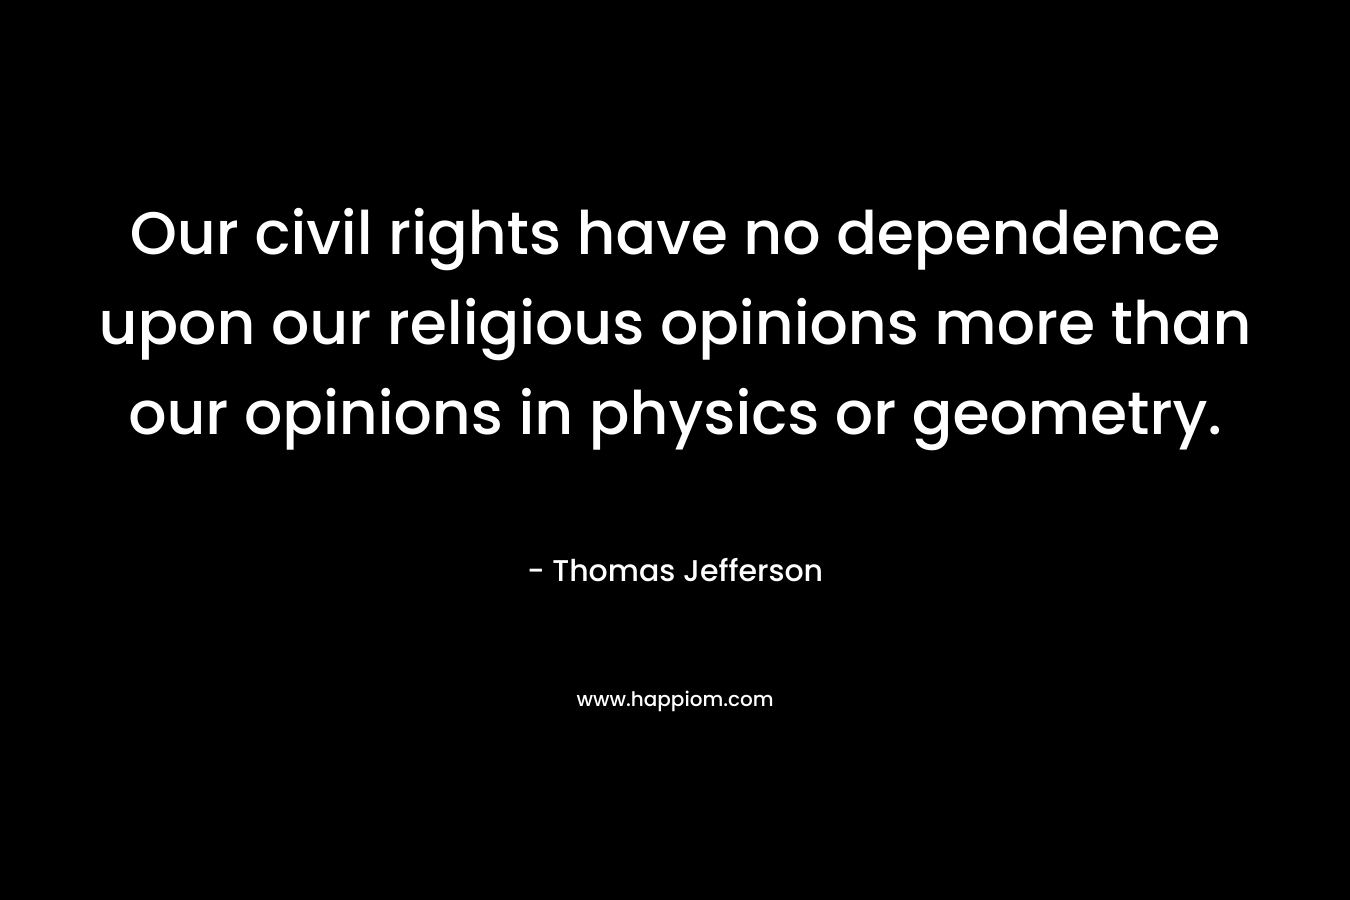 Our civil rights have no dependence upon our religious opinions more than our opinions in physics or geometry.